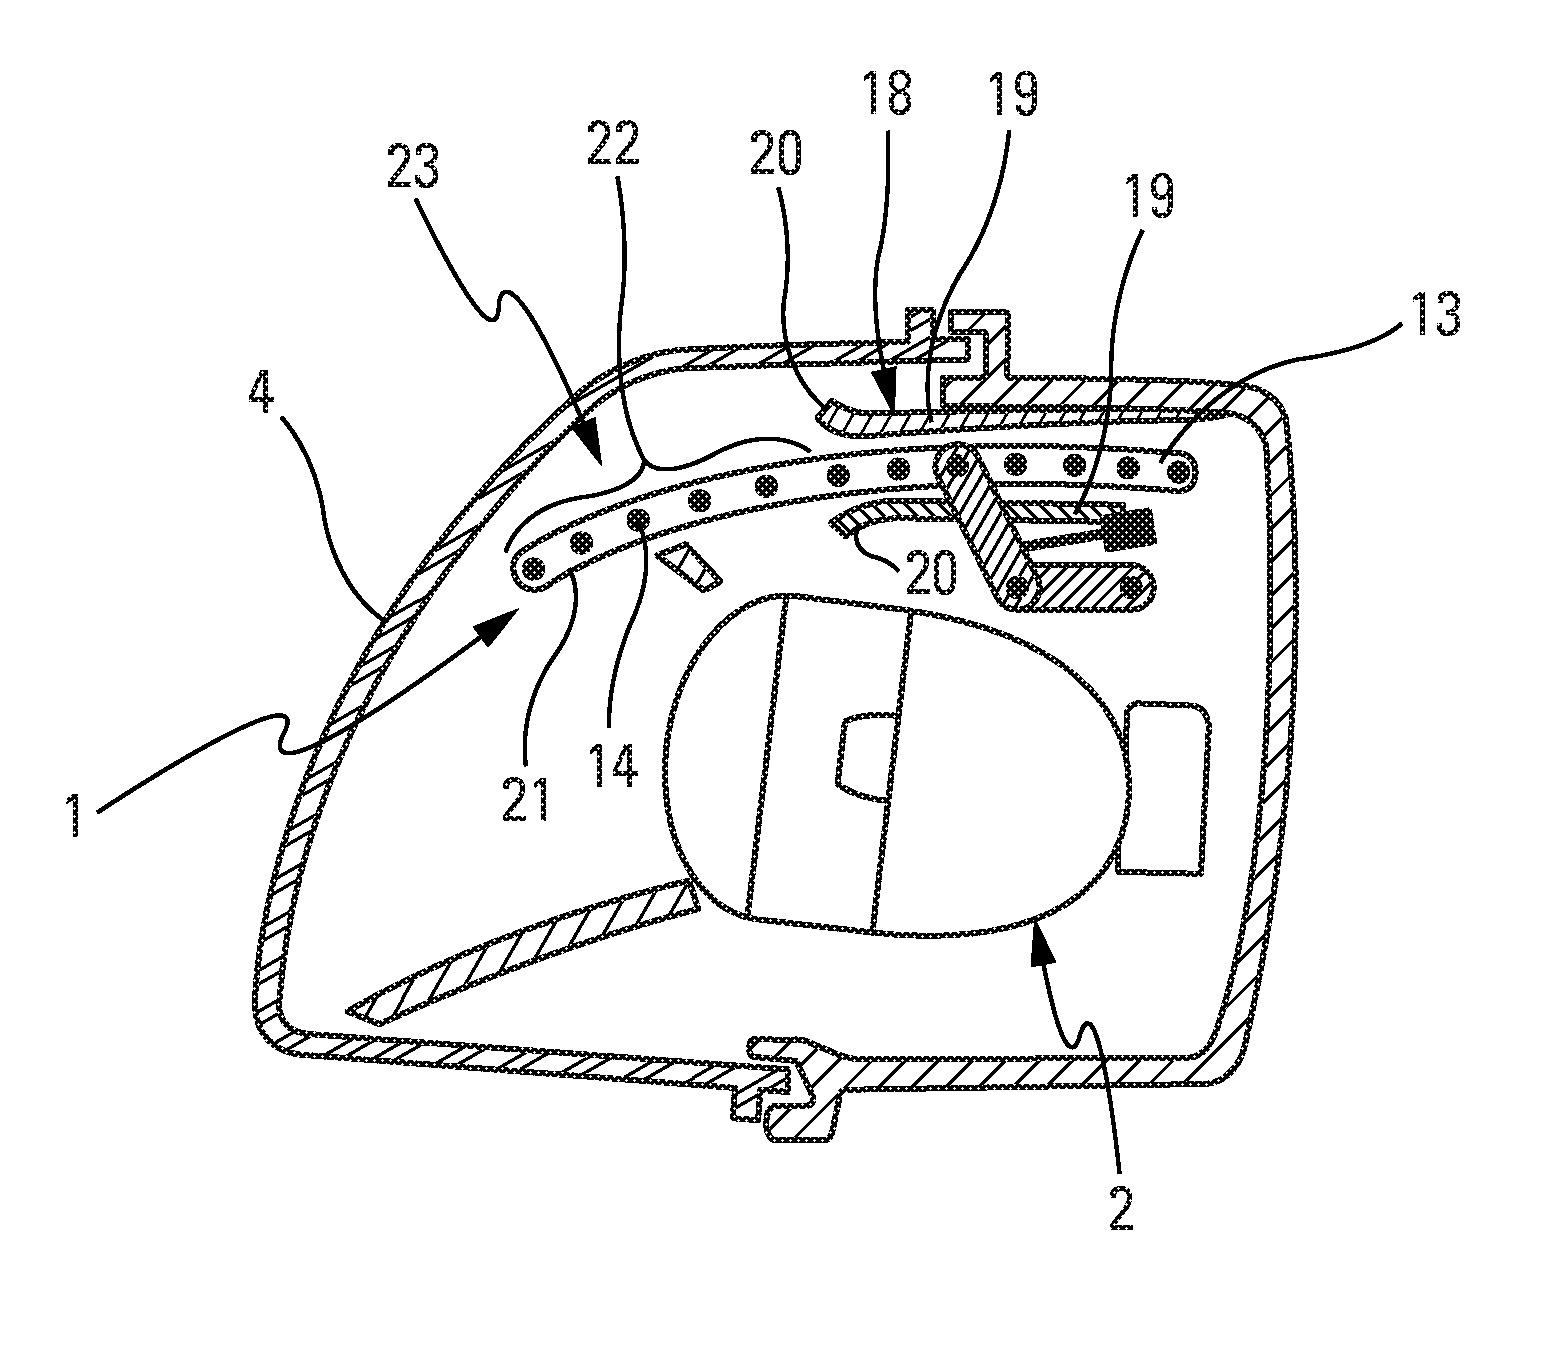 Lighting or signaling device with a moveable daytime element